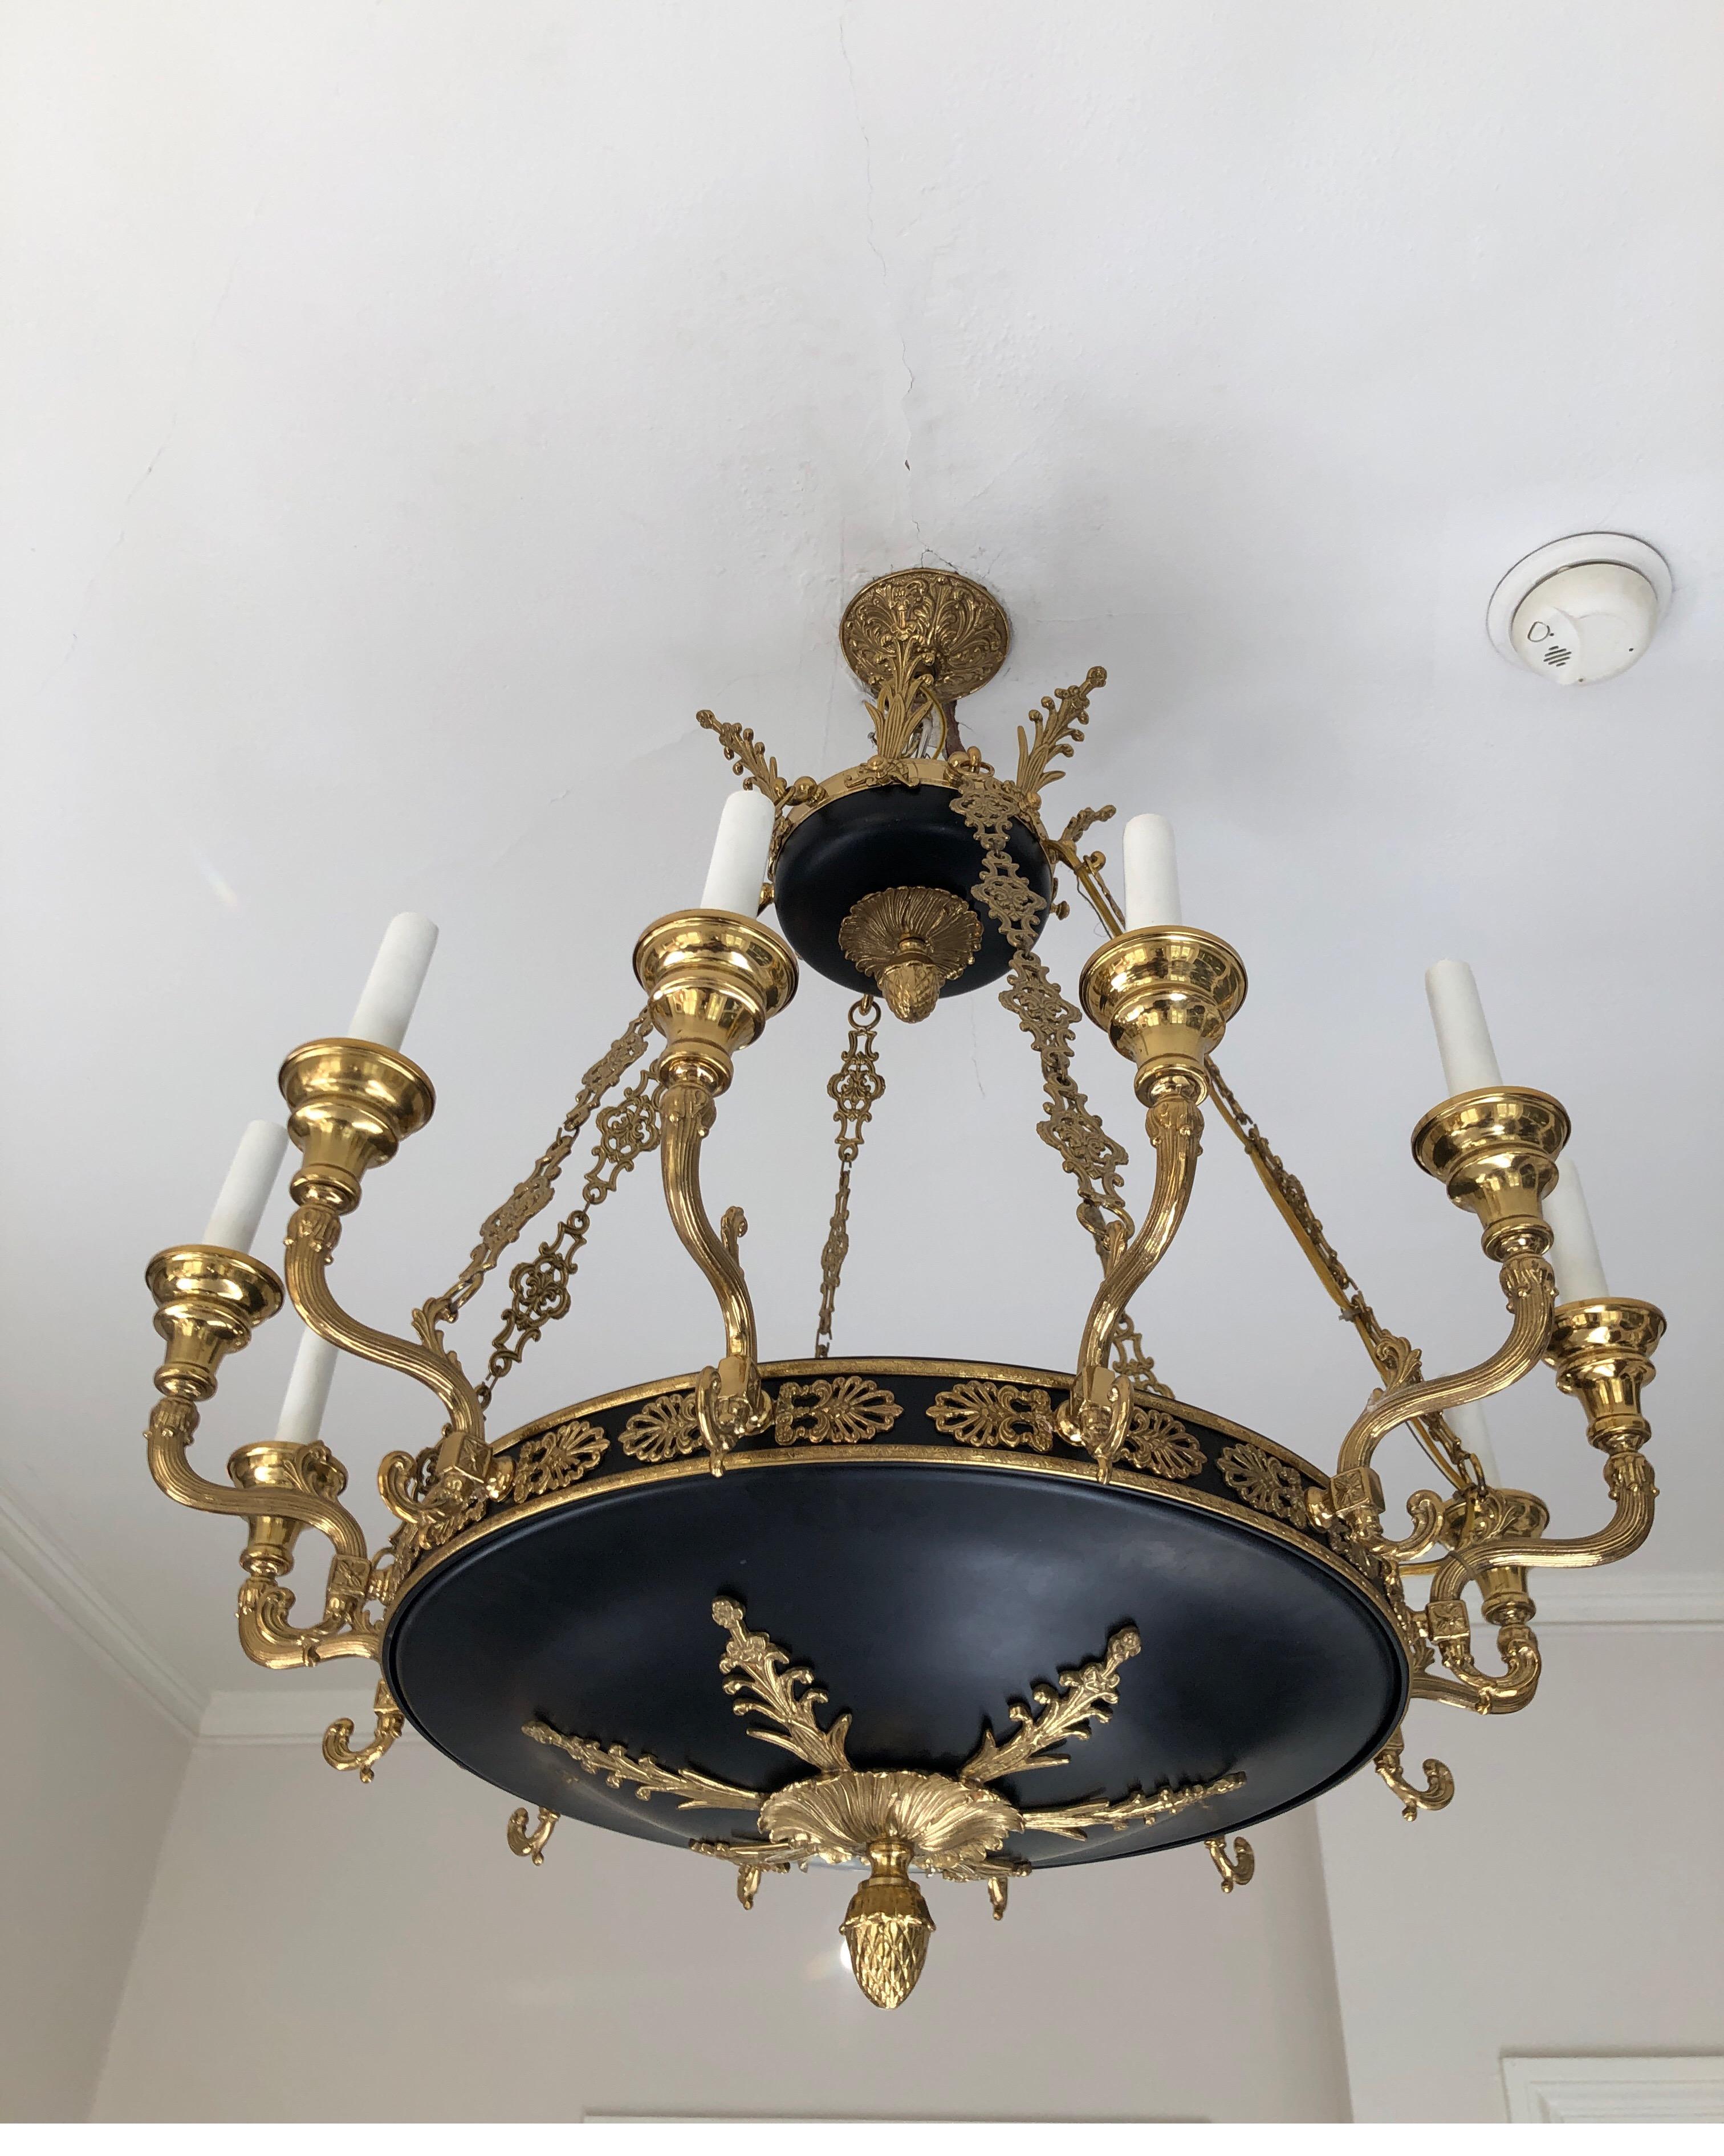 French Empire style twelve-arm chandelier. Brass and black,
circa 1940s.

Current drop here is 42